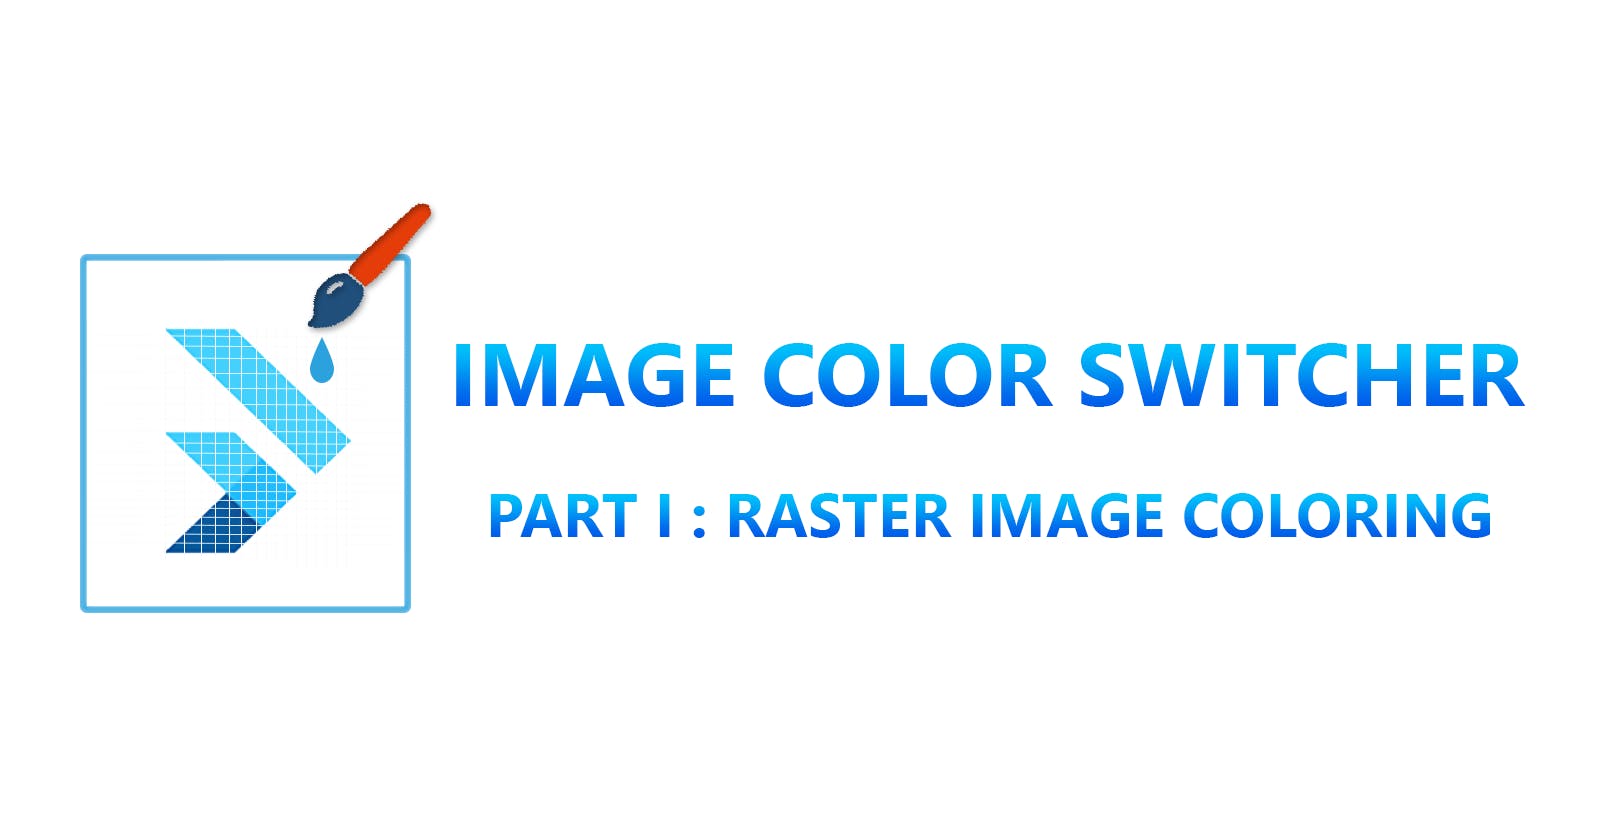 ImageColorSwitcher in Flutter: Part 1 Raster Image Coloring